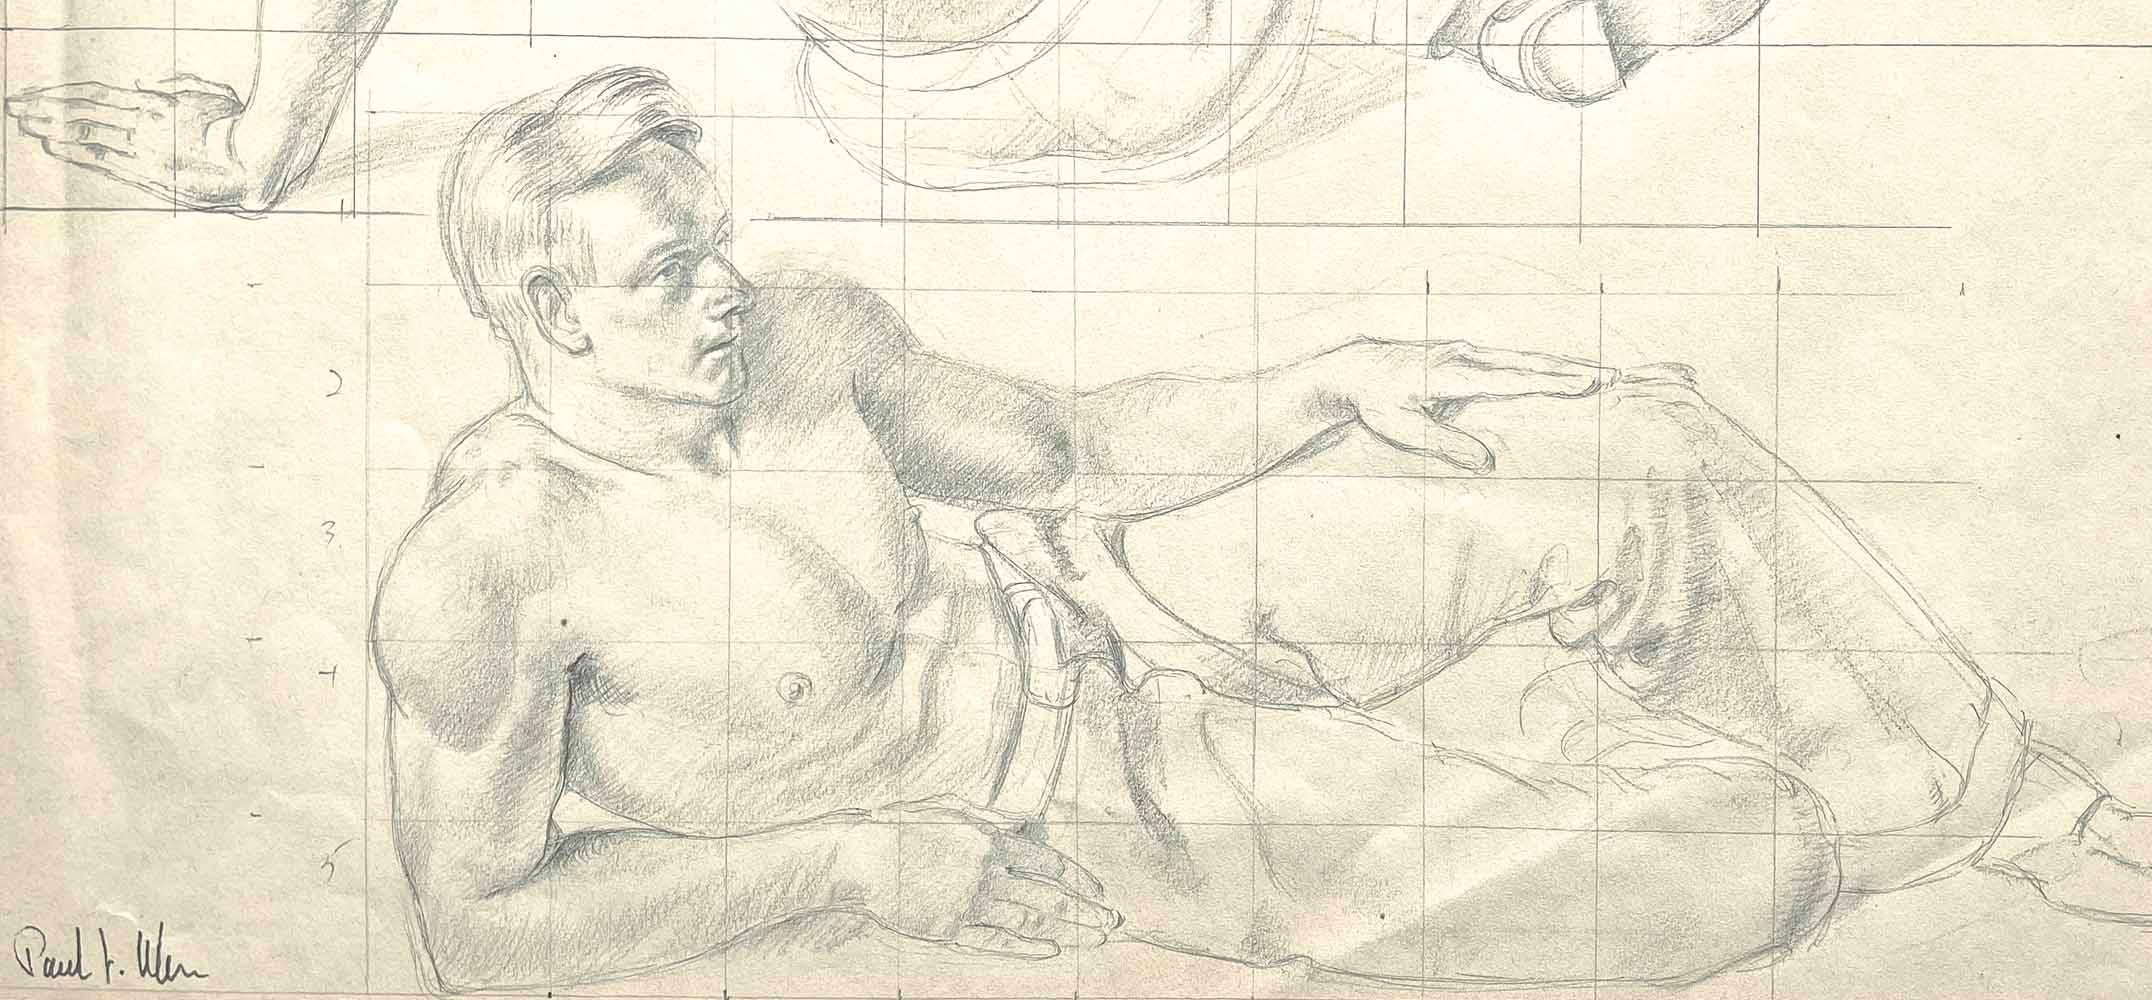 Beautifully and sensitively drawn by Paul Ulen, this single sheet includes two images of a half-nude male figure, seated and reclining, wearing loose worker pants and sporting a fashionable 1930s haircut.  In each case, the figure's strong, muscular